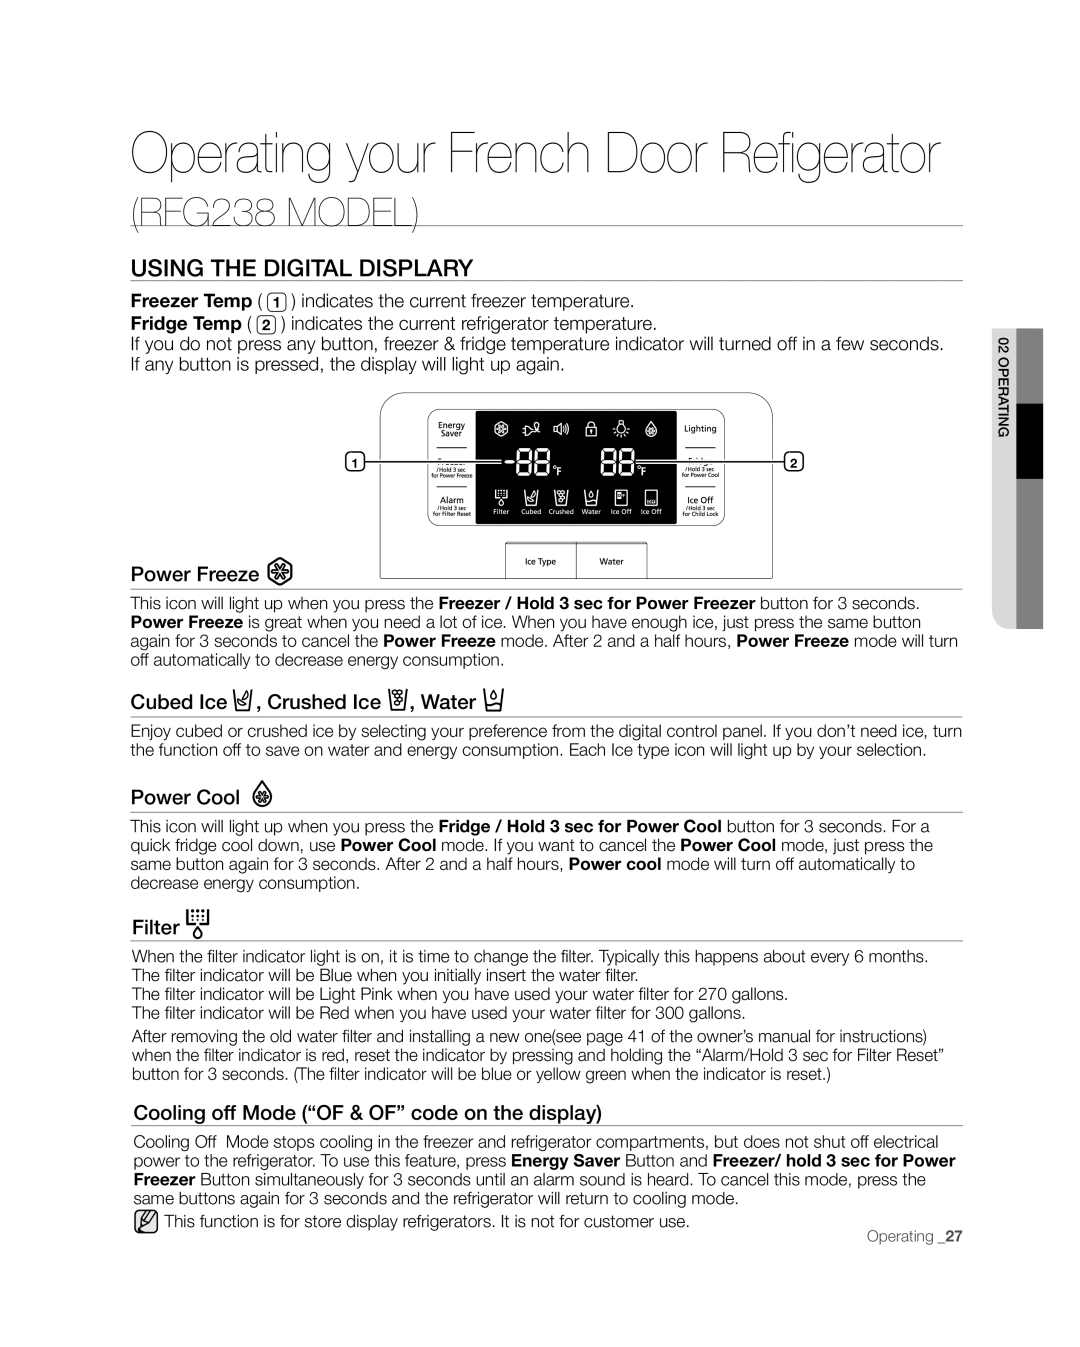 Samsung RFG238AARS Using The Digital Displary, Operating your French Door Refigerator, RFG238 MODEL, Power Freeze, Filter 